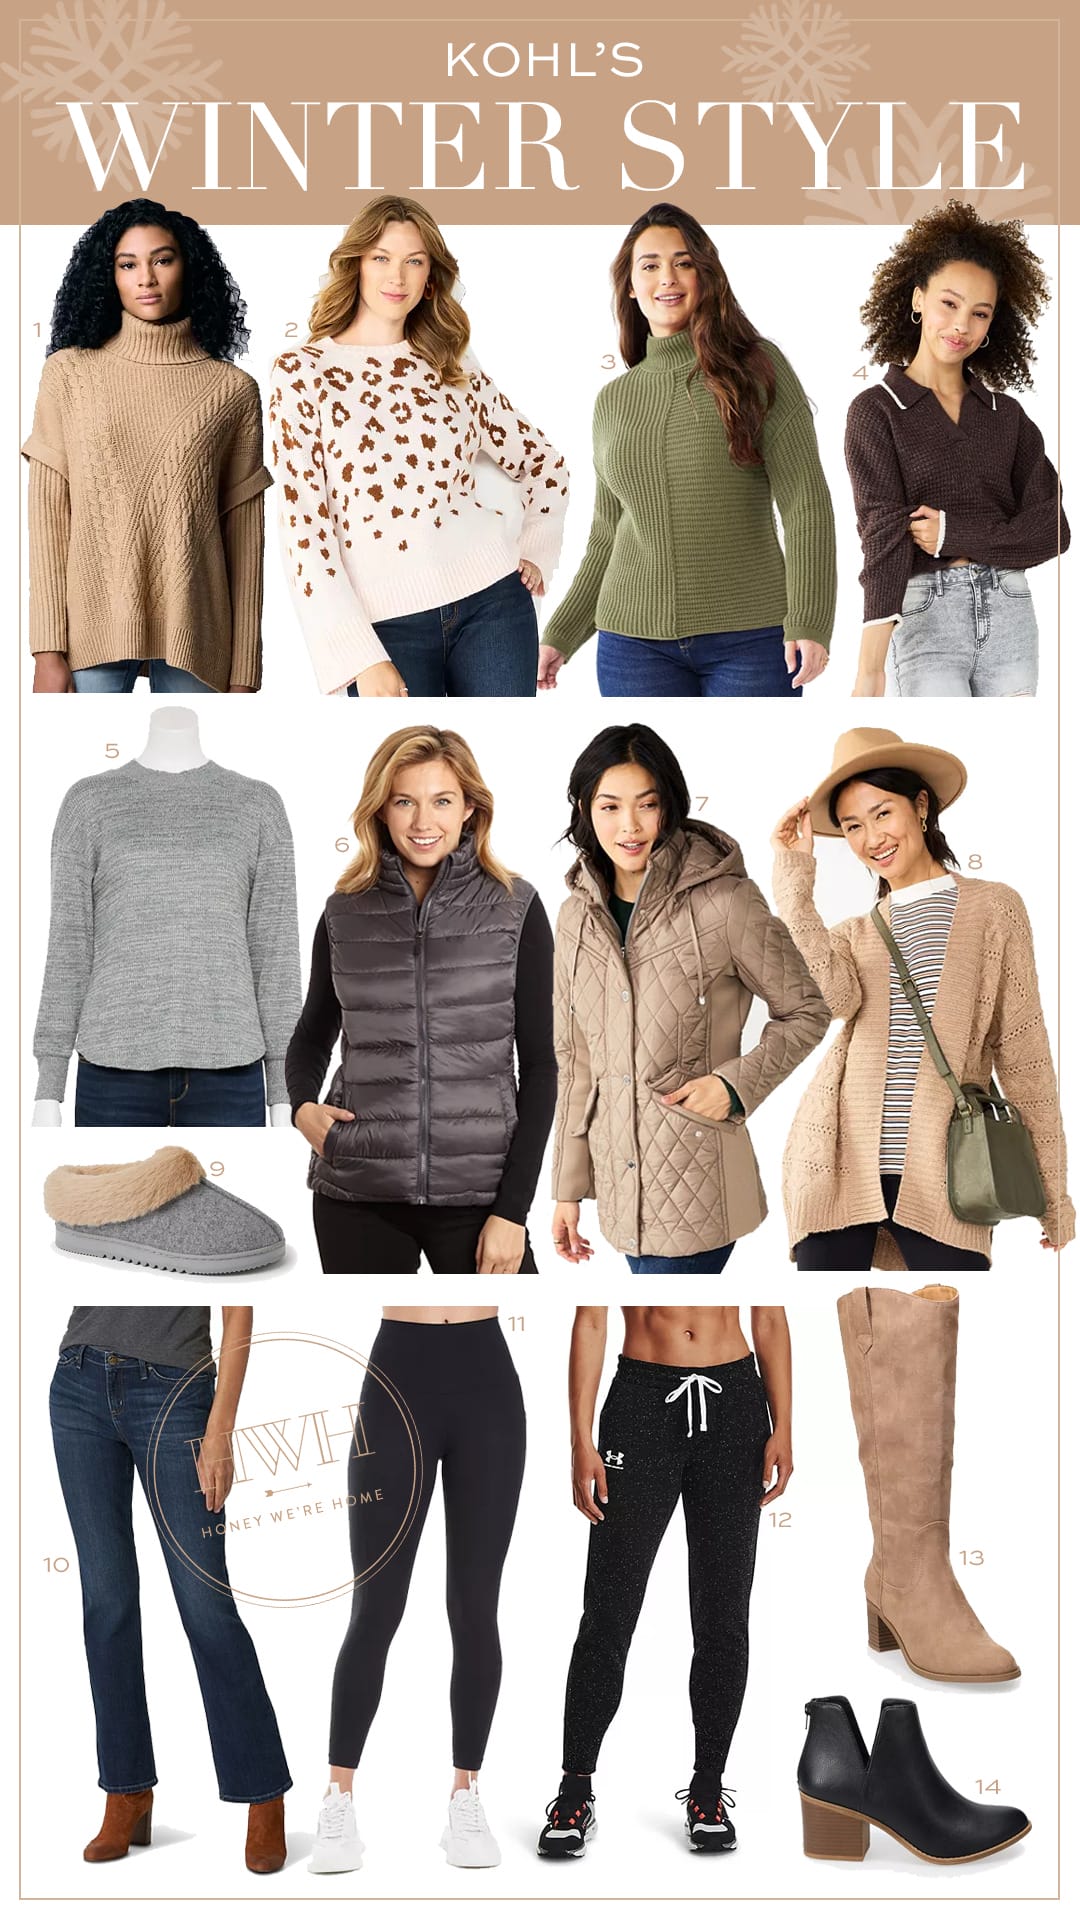 My Favorite Casual Winter Outfit From Kohl's